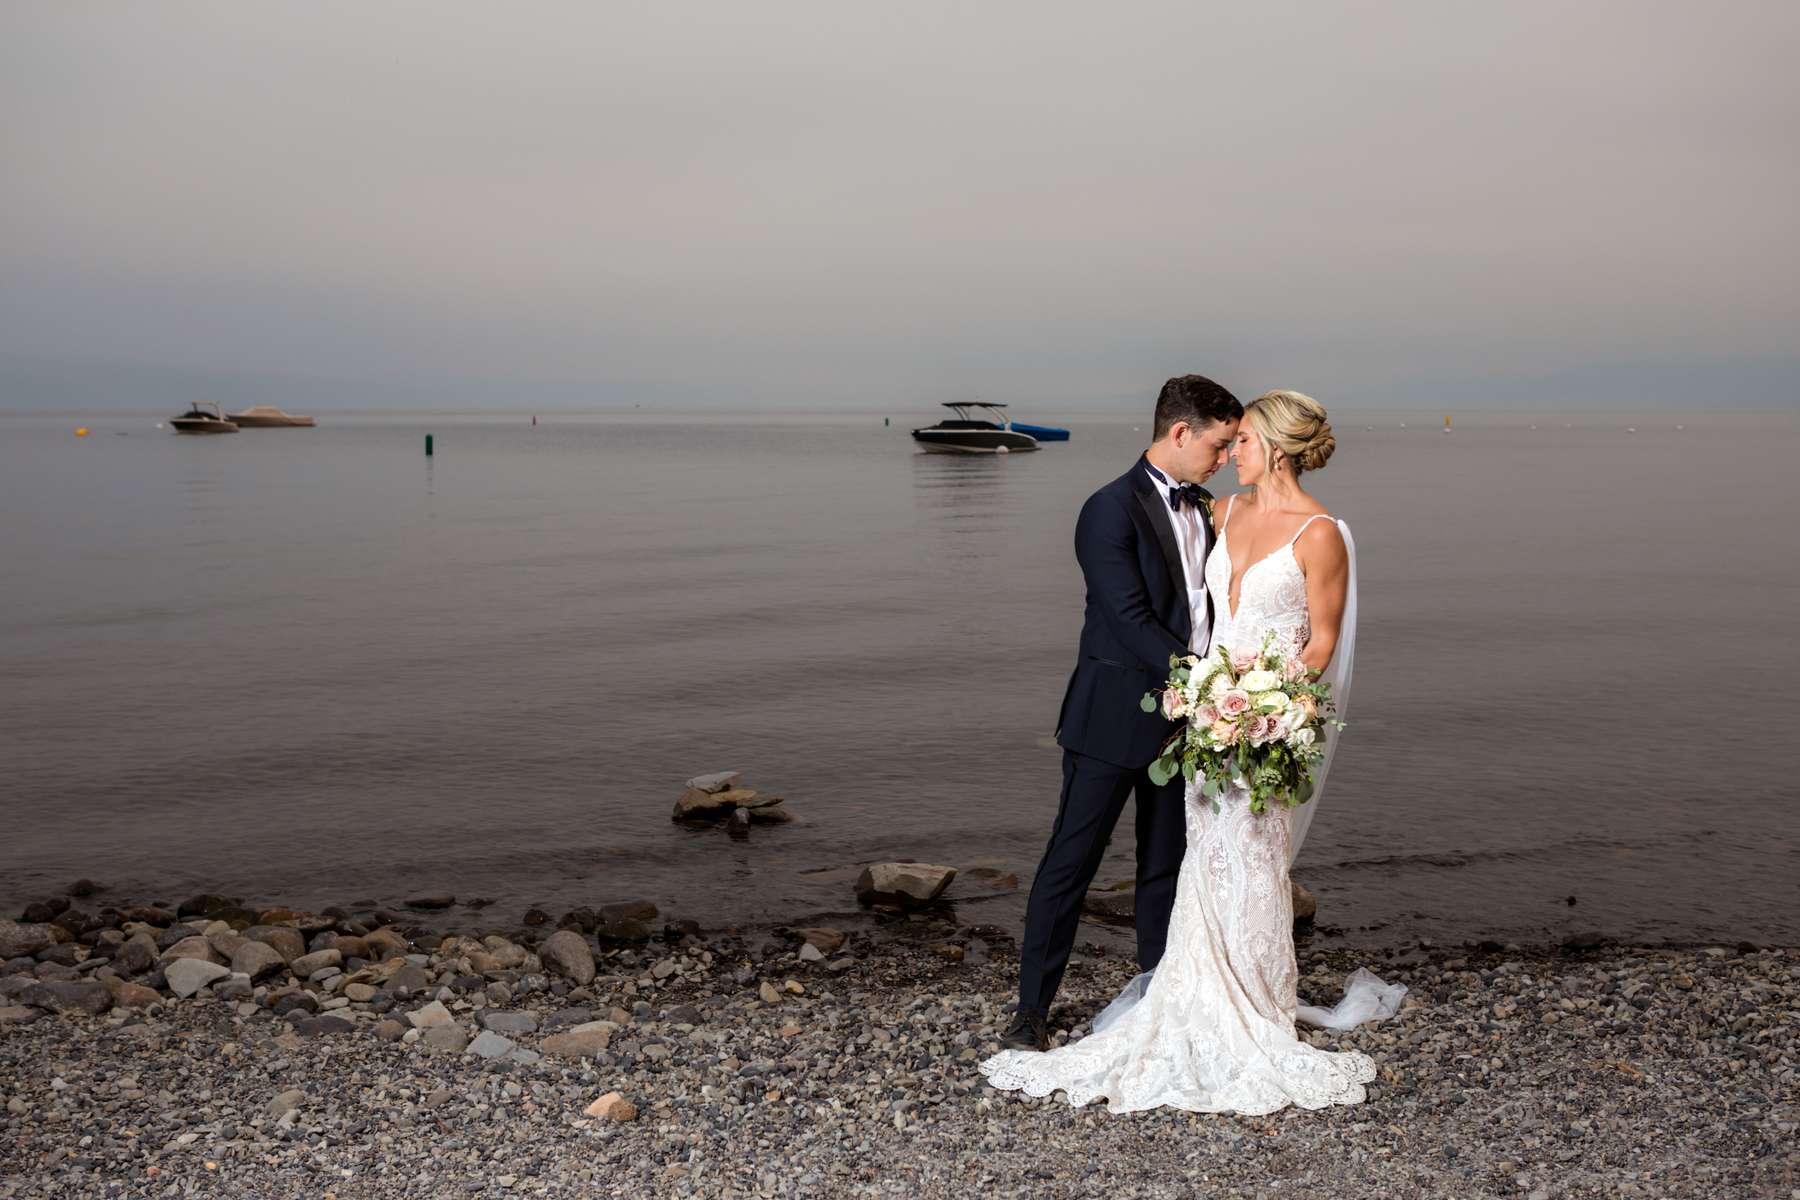 Tahoe Wedding at Gar Woods. Bride and Groom after ceremony enjoying the lake.